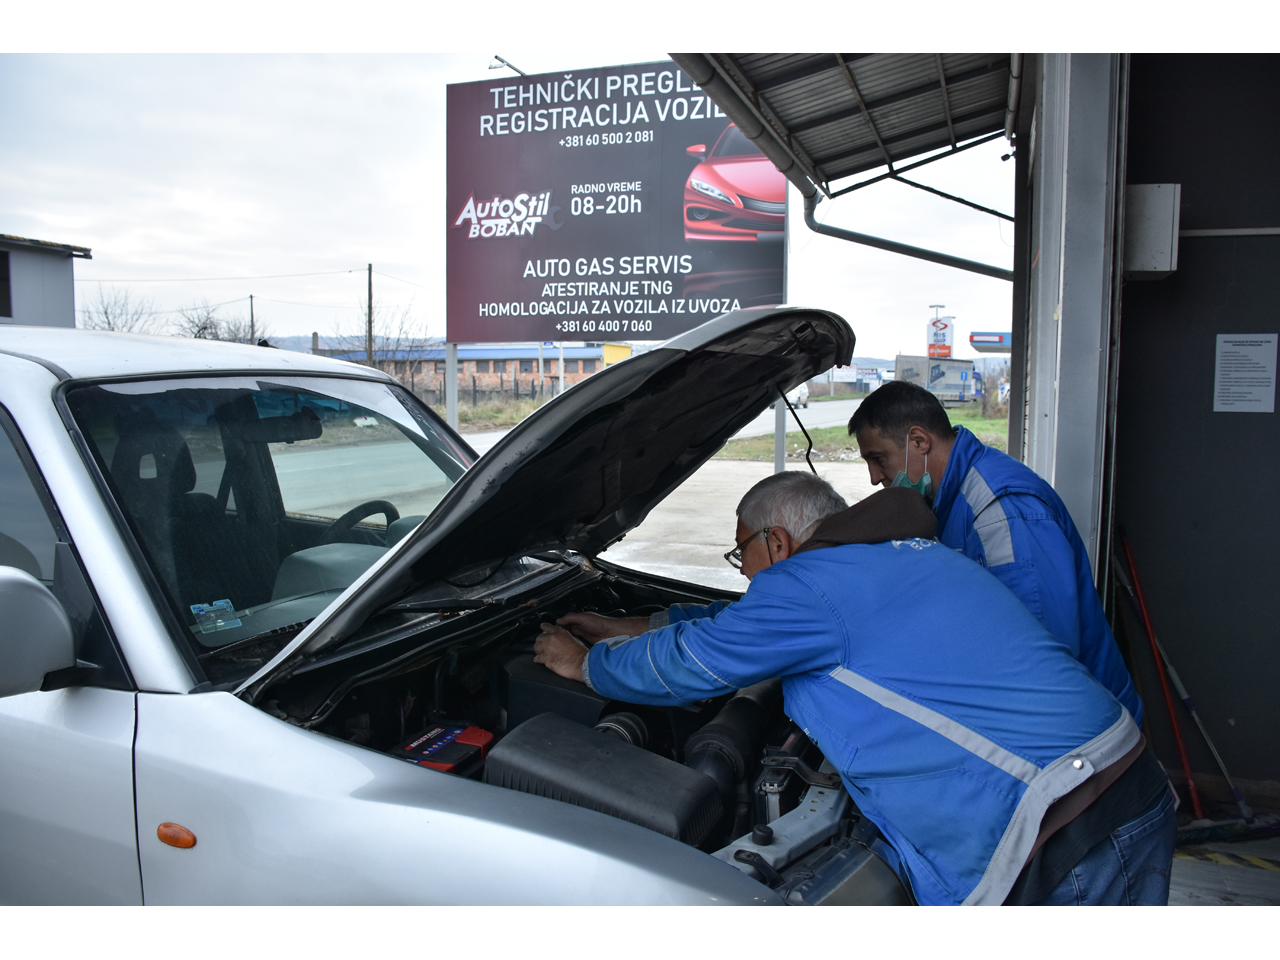 AUTO STIL BOBAN TECHNICAL INSPECTION AND REGISTRATION Auto servisi Beograd